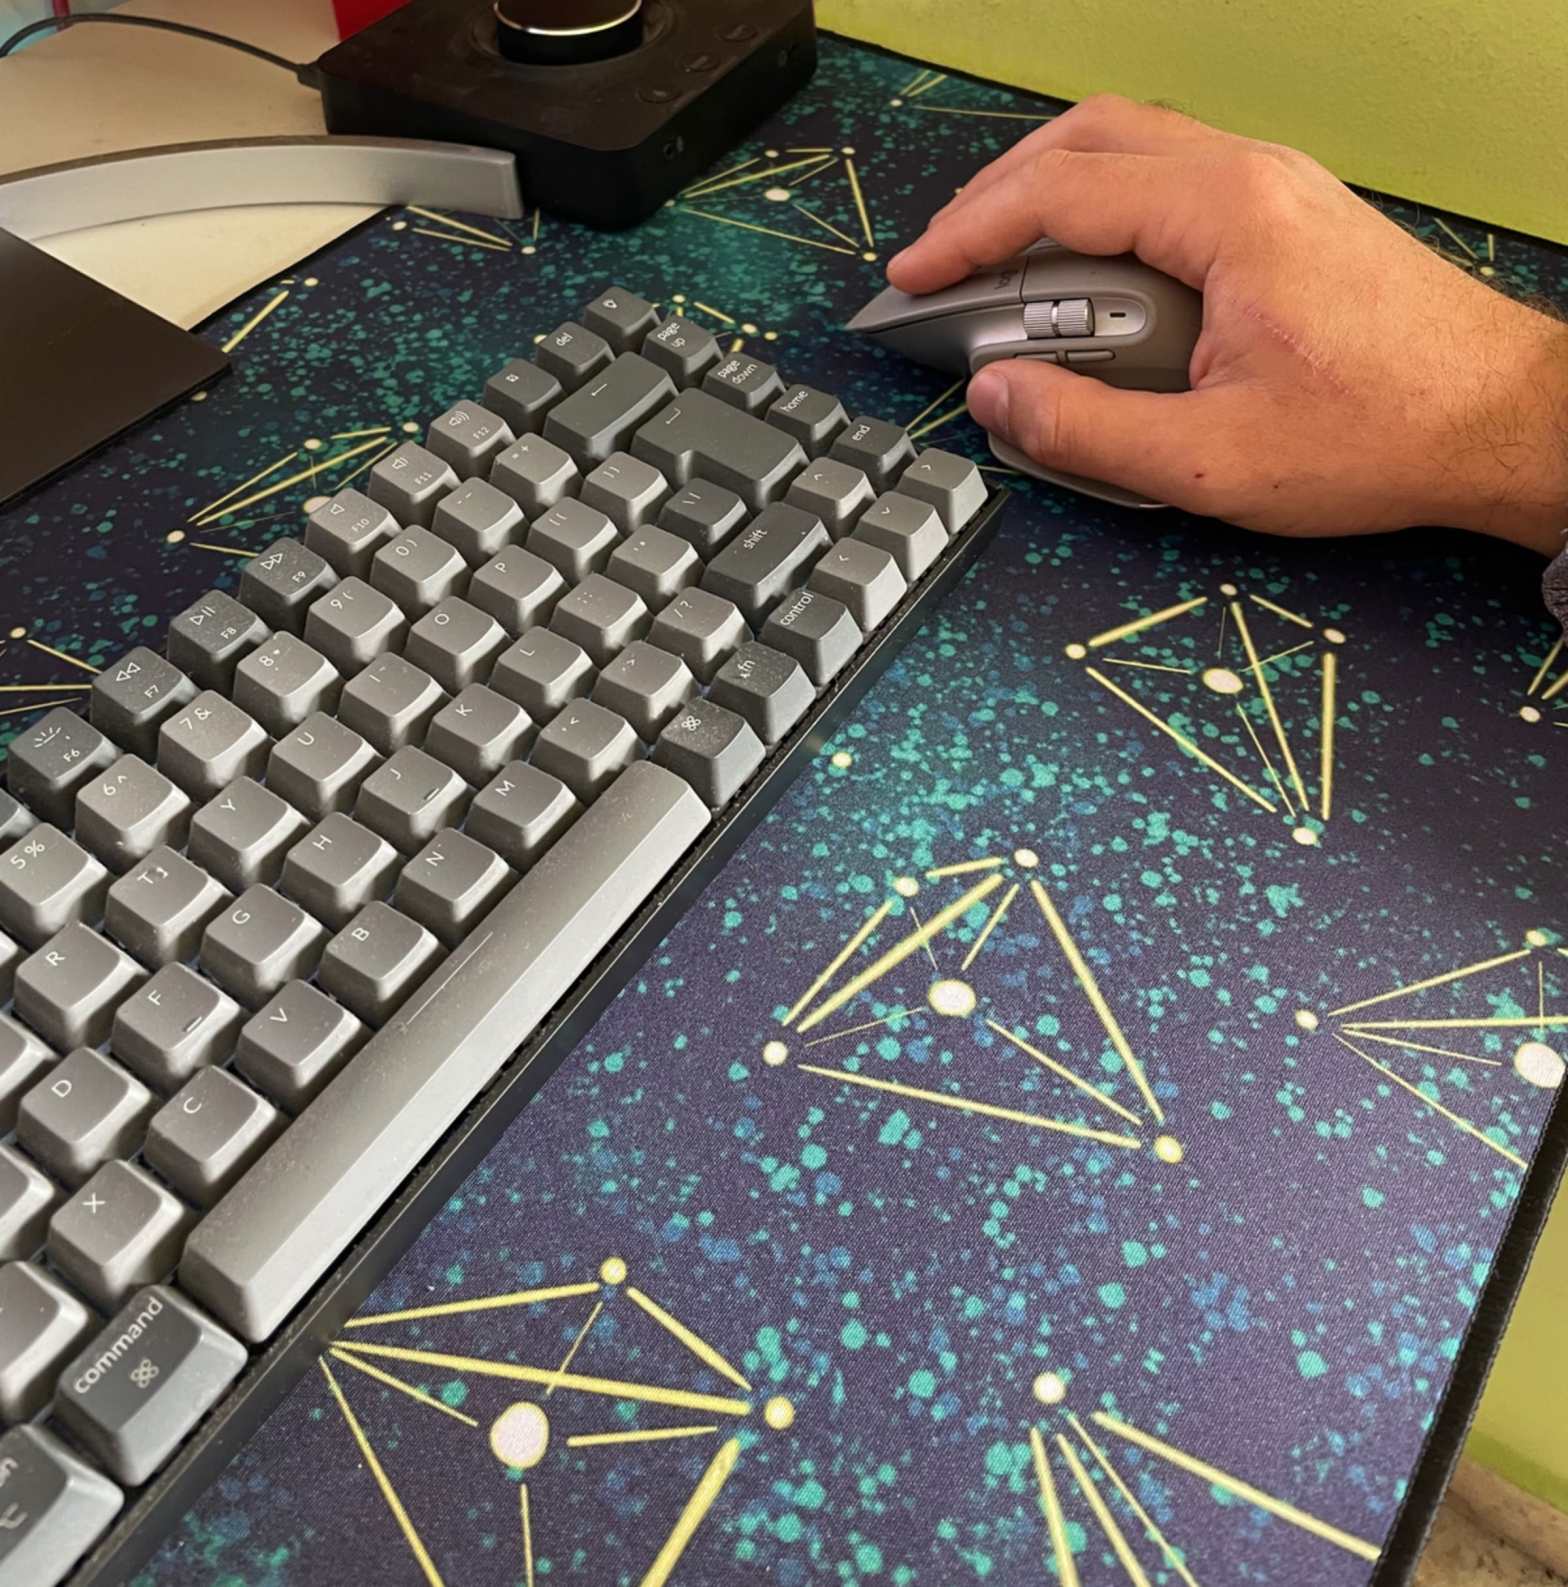 Large desk mat with a space geek galaxy pattern of pyramid constellations fading to black on one side